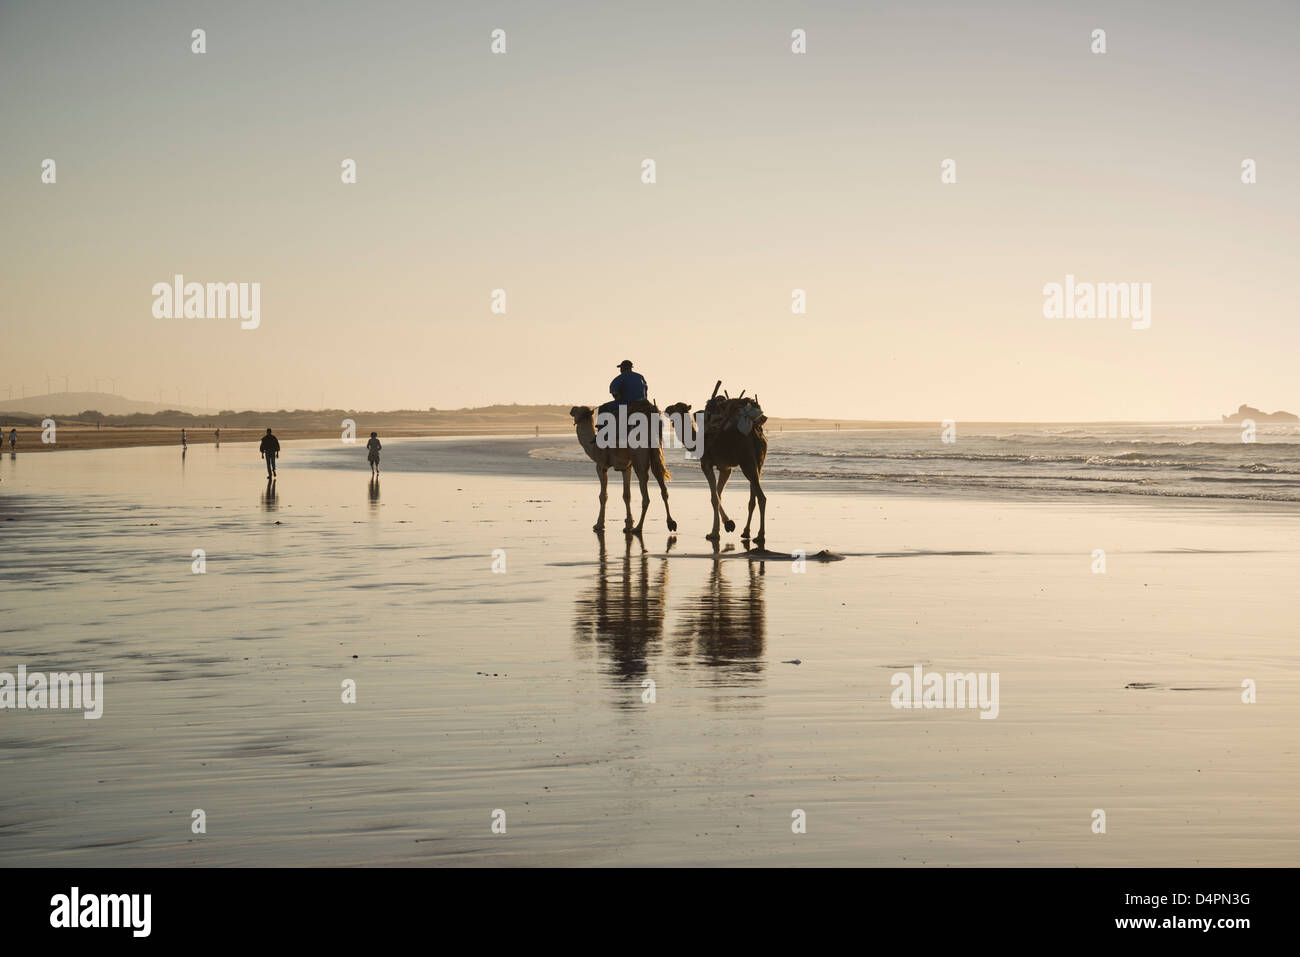 Camels on the beach at Essaouira, Morocco Stock Photo